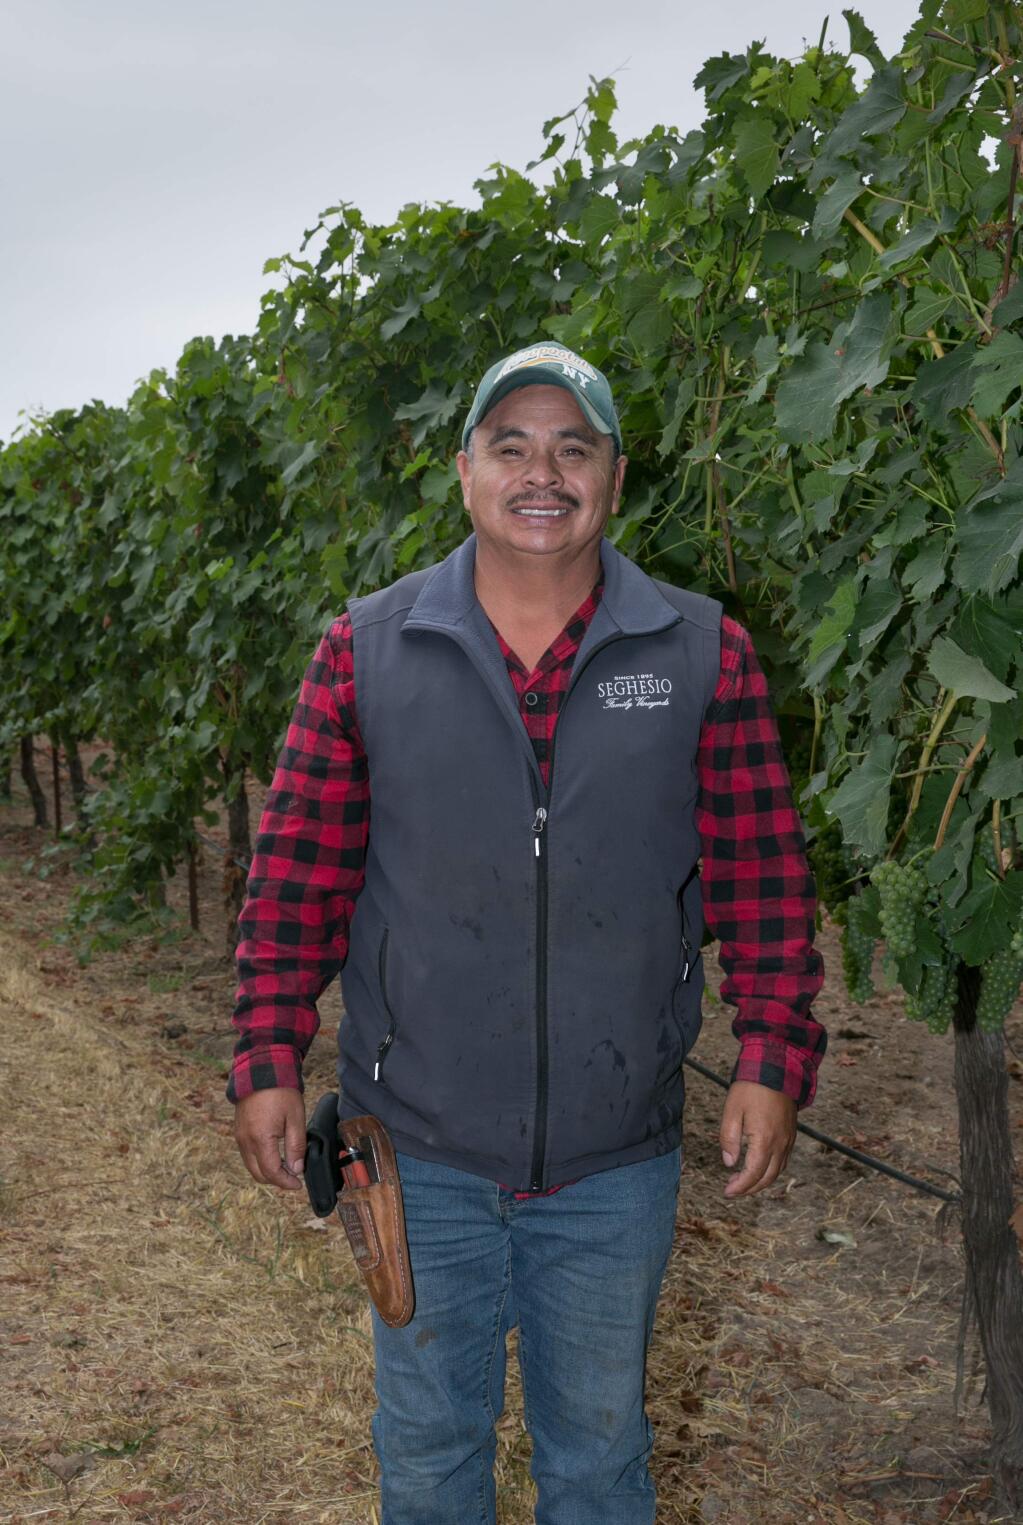 Jose Cervantes, Cornerstone Certified Vineyard, is the Sonoma County Grape Grower Foundations 2019 vineyard employee of the year. (Courtesy: Sonoma County Grape Growers Foundation)